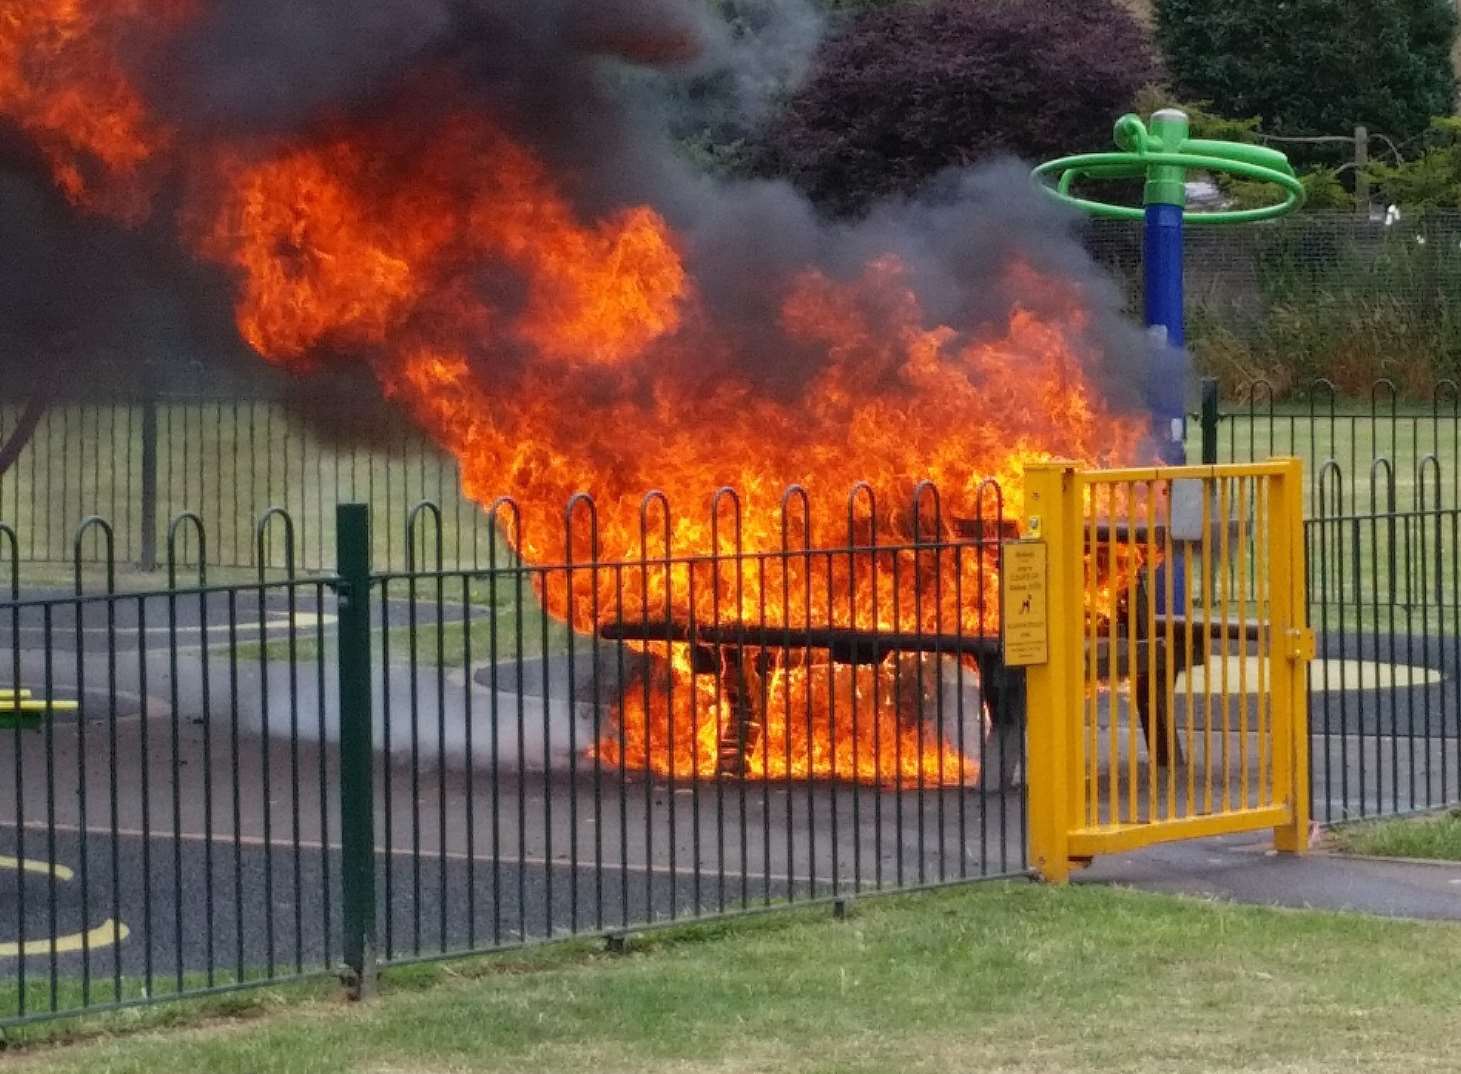 A bench was set on fire in Rosebery Road recreation ground, Chatham